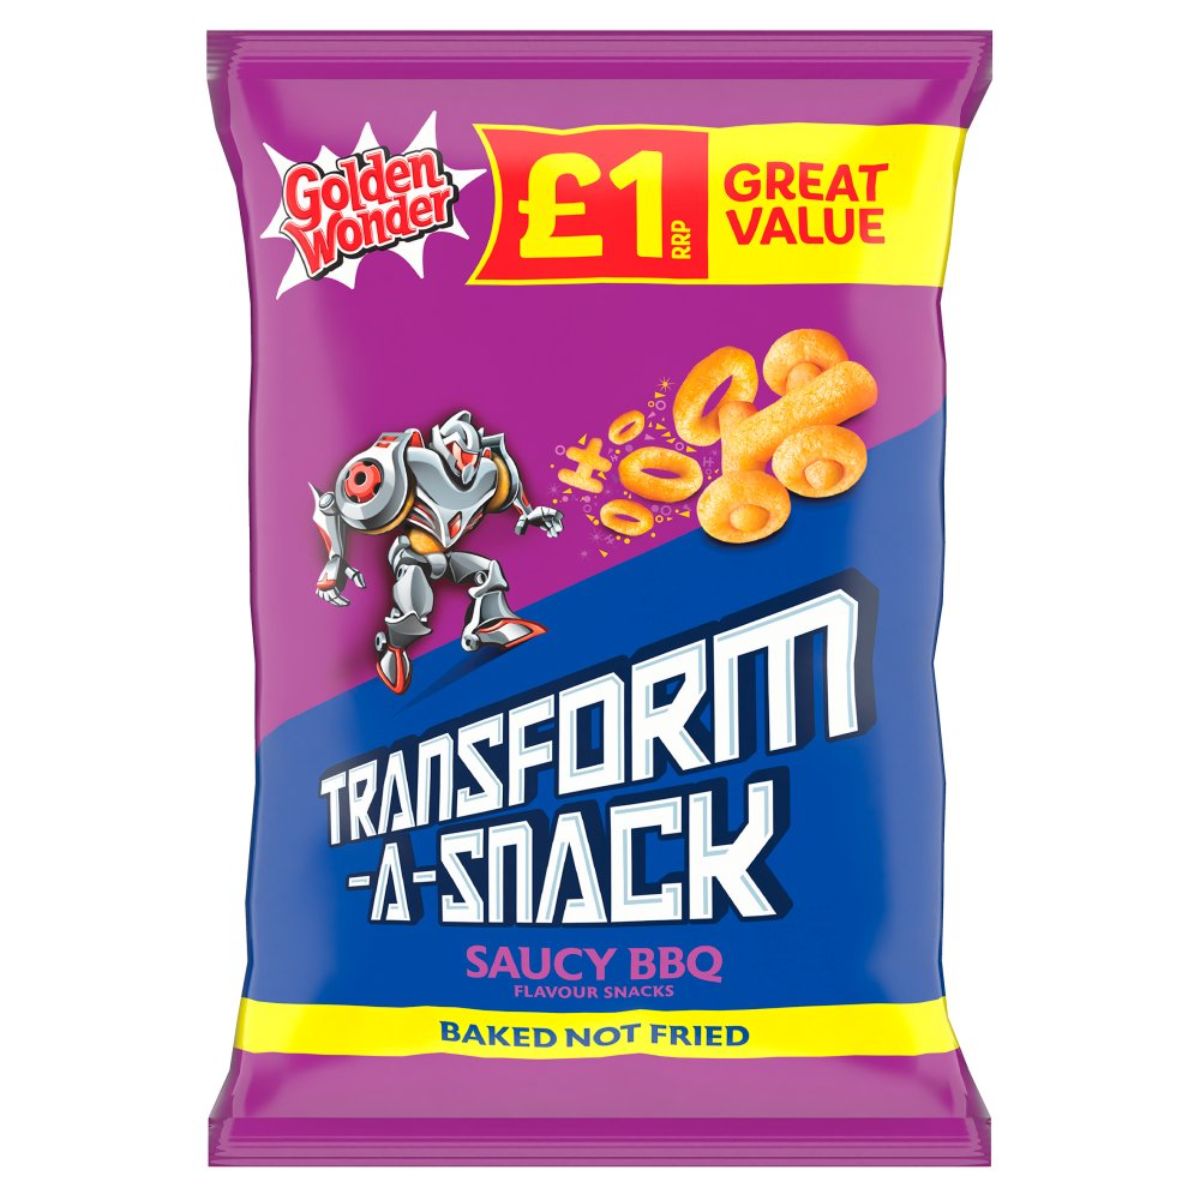 A bag of Golden Wonder - Transform A Snack Saucy Barbeque - 56g salted peanuts.